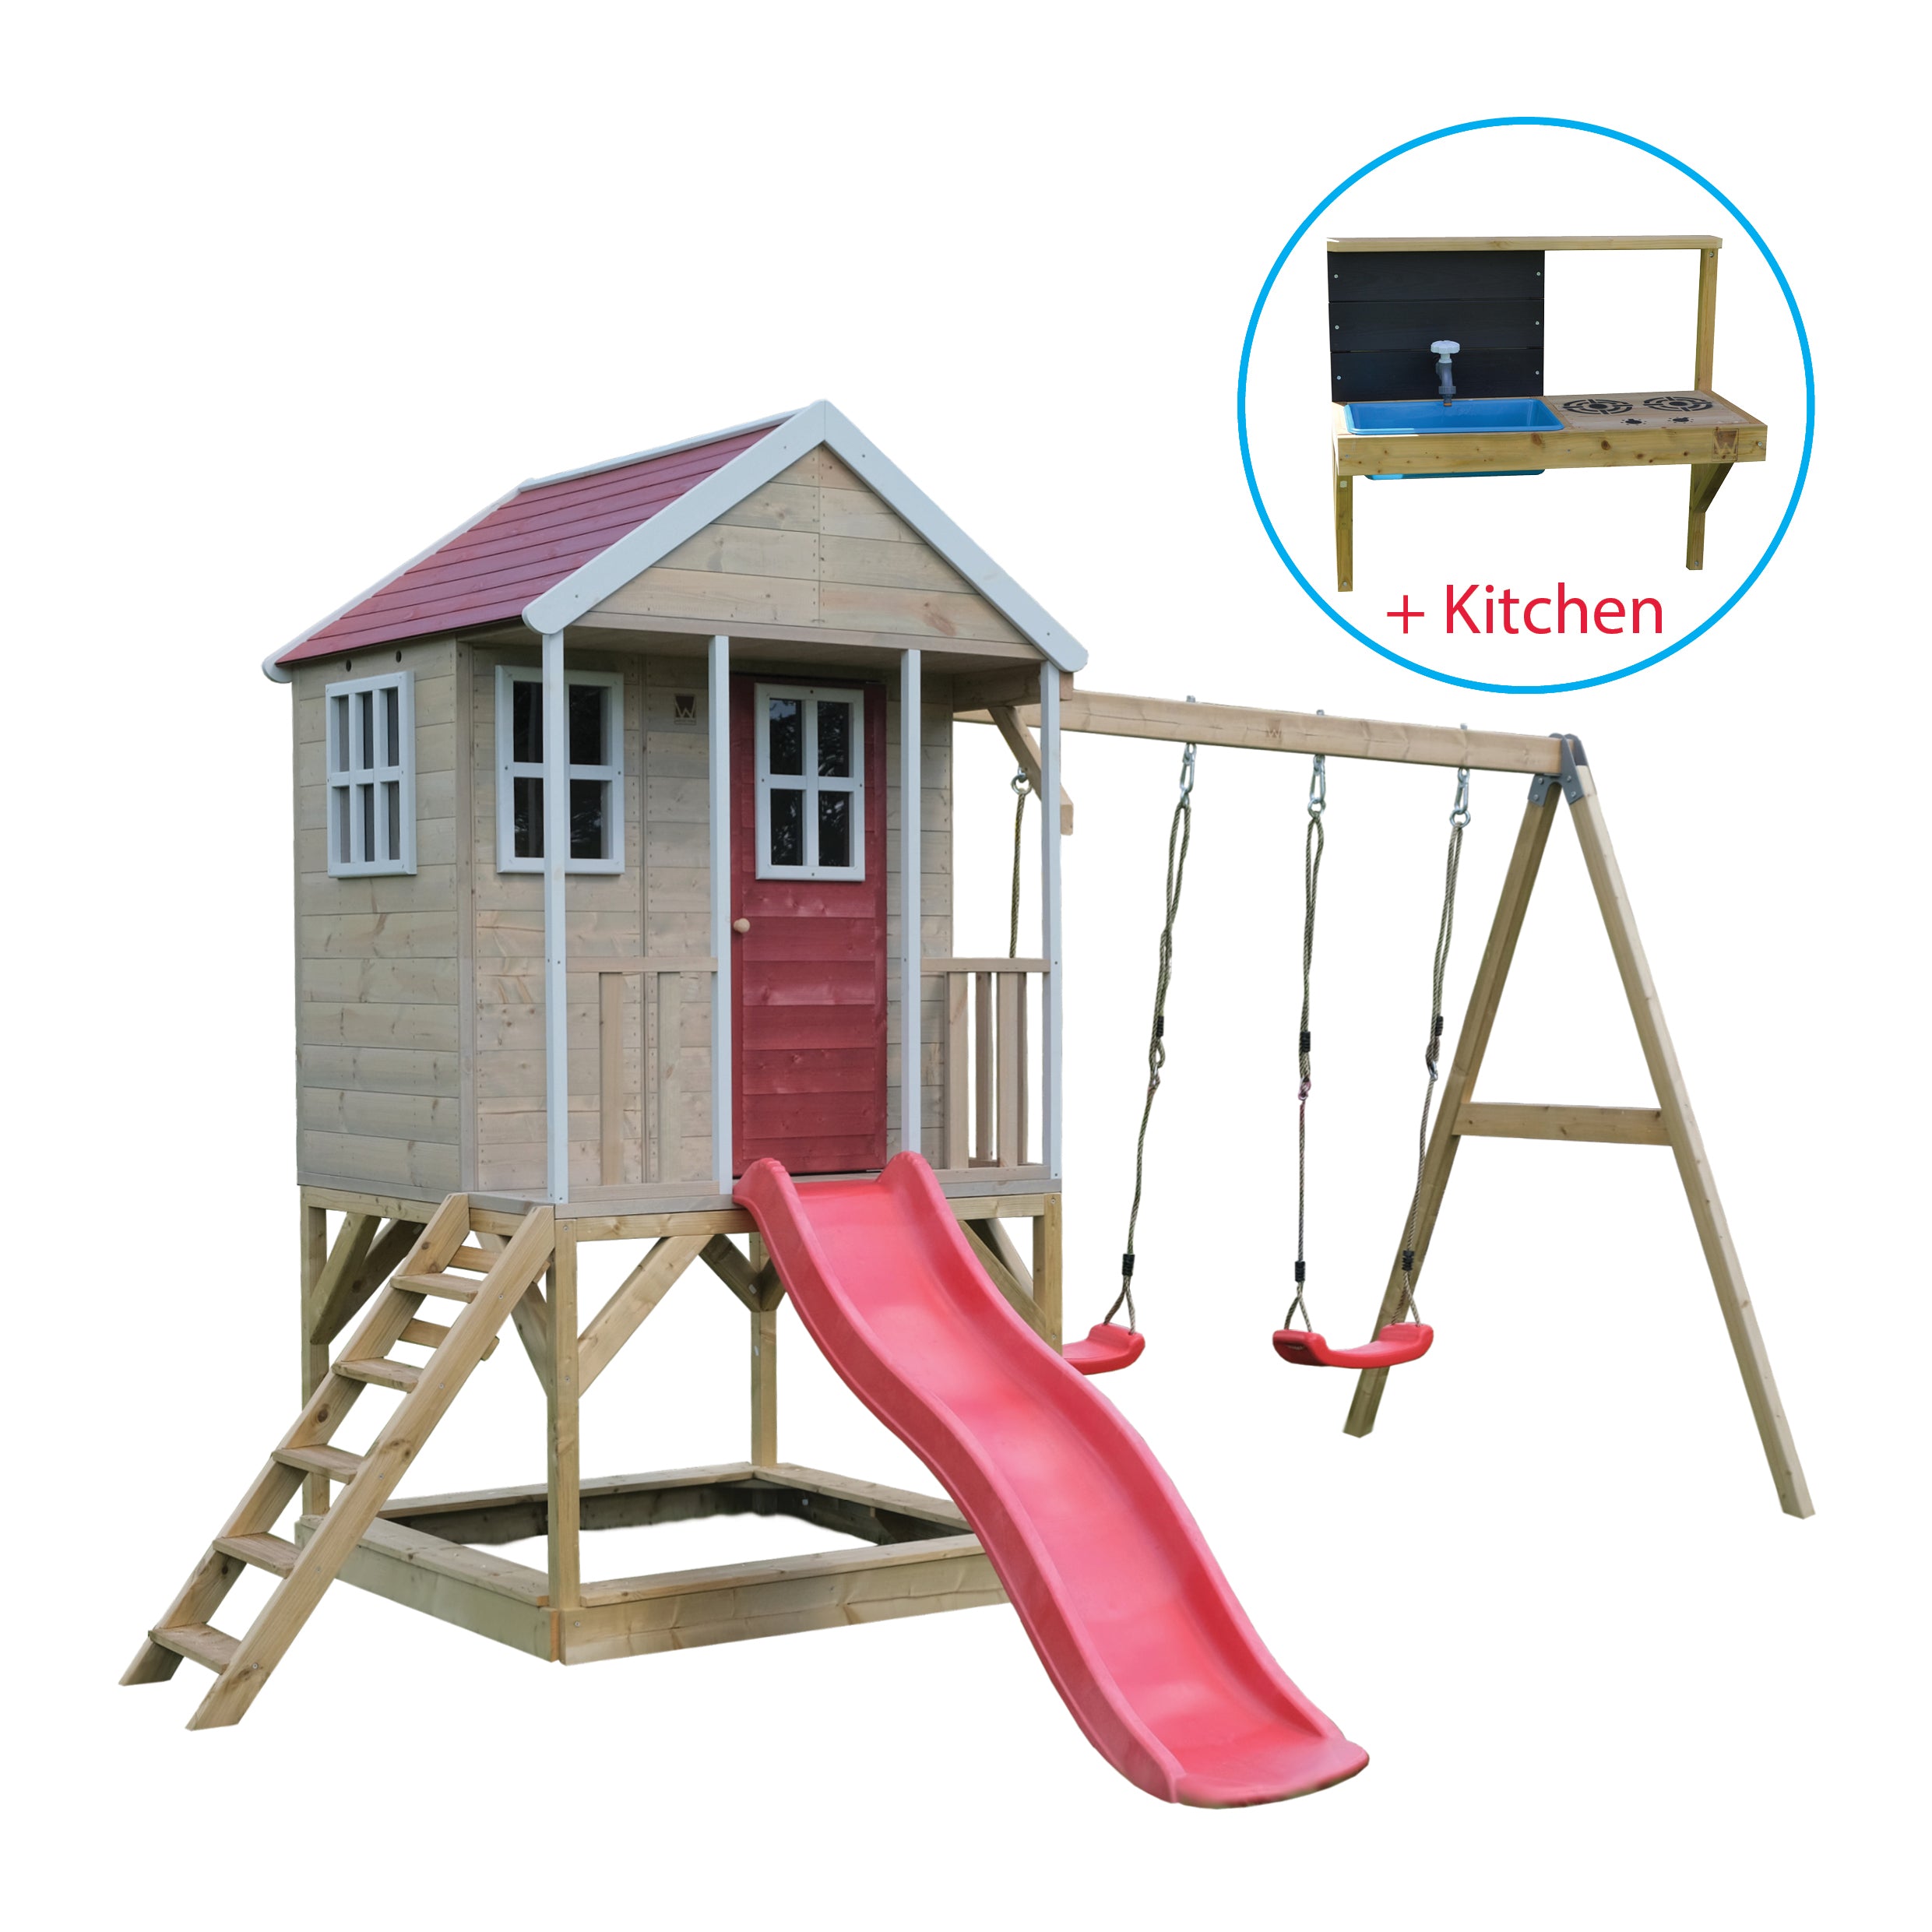 M30R-K Nordic Adventure House with Platform, Slide and Double Swing + Kitchen Attachment